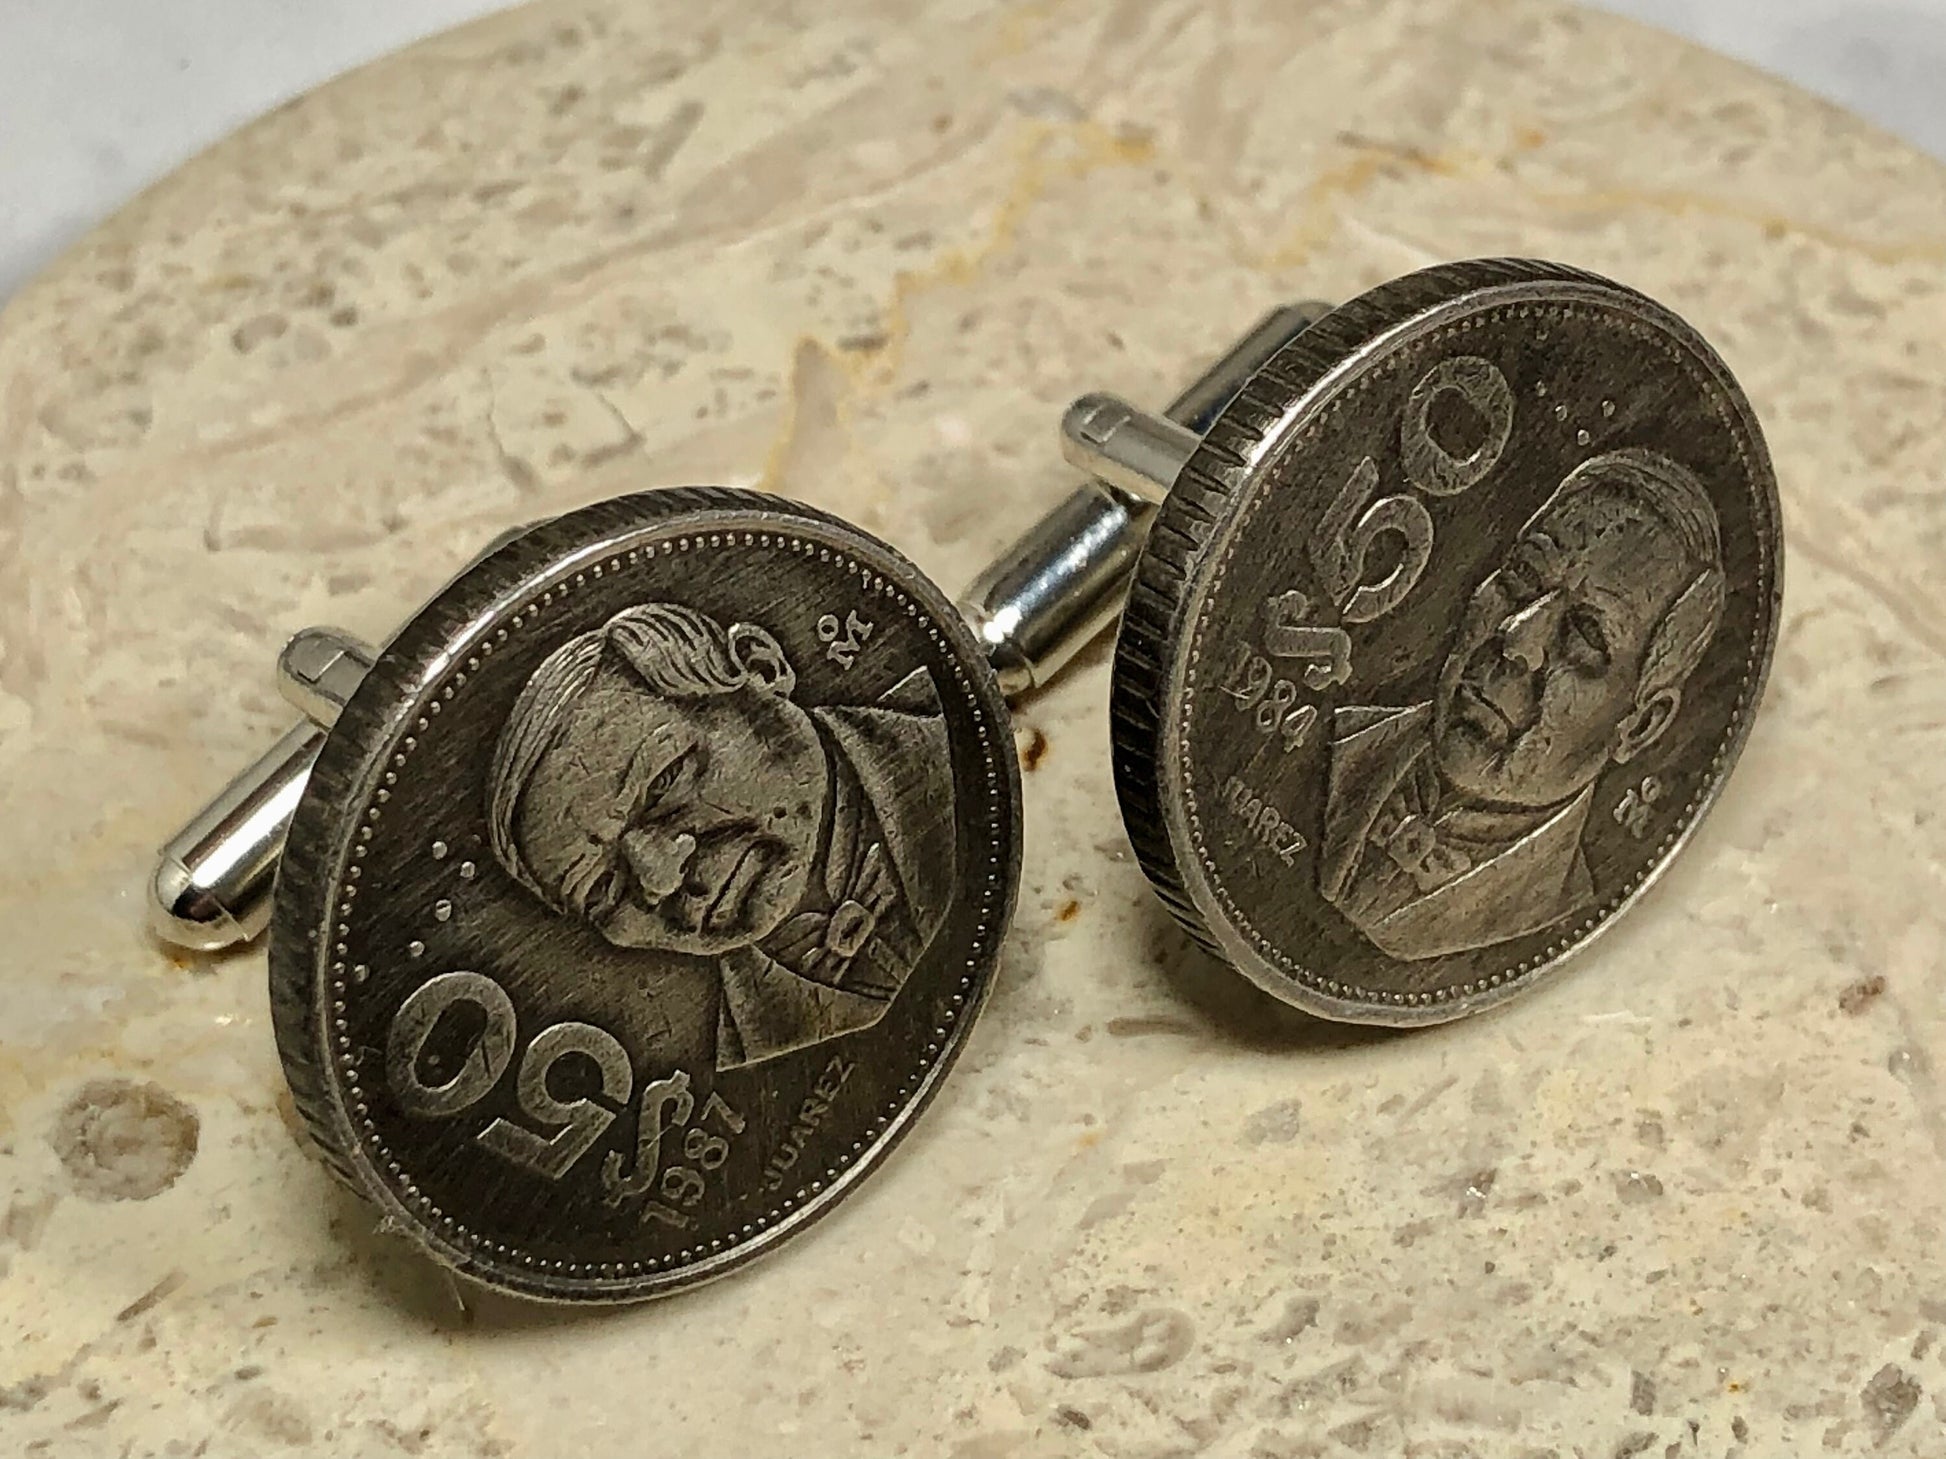 Mexico Coin Cuff Links Mexican 50 Dollar Custom Coins Personal Cufflinks Handmade Jewelry Gift Friend Charm For Him Her World Coin Collector